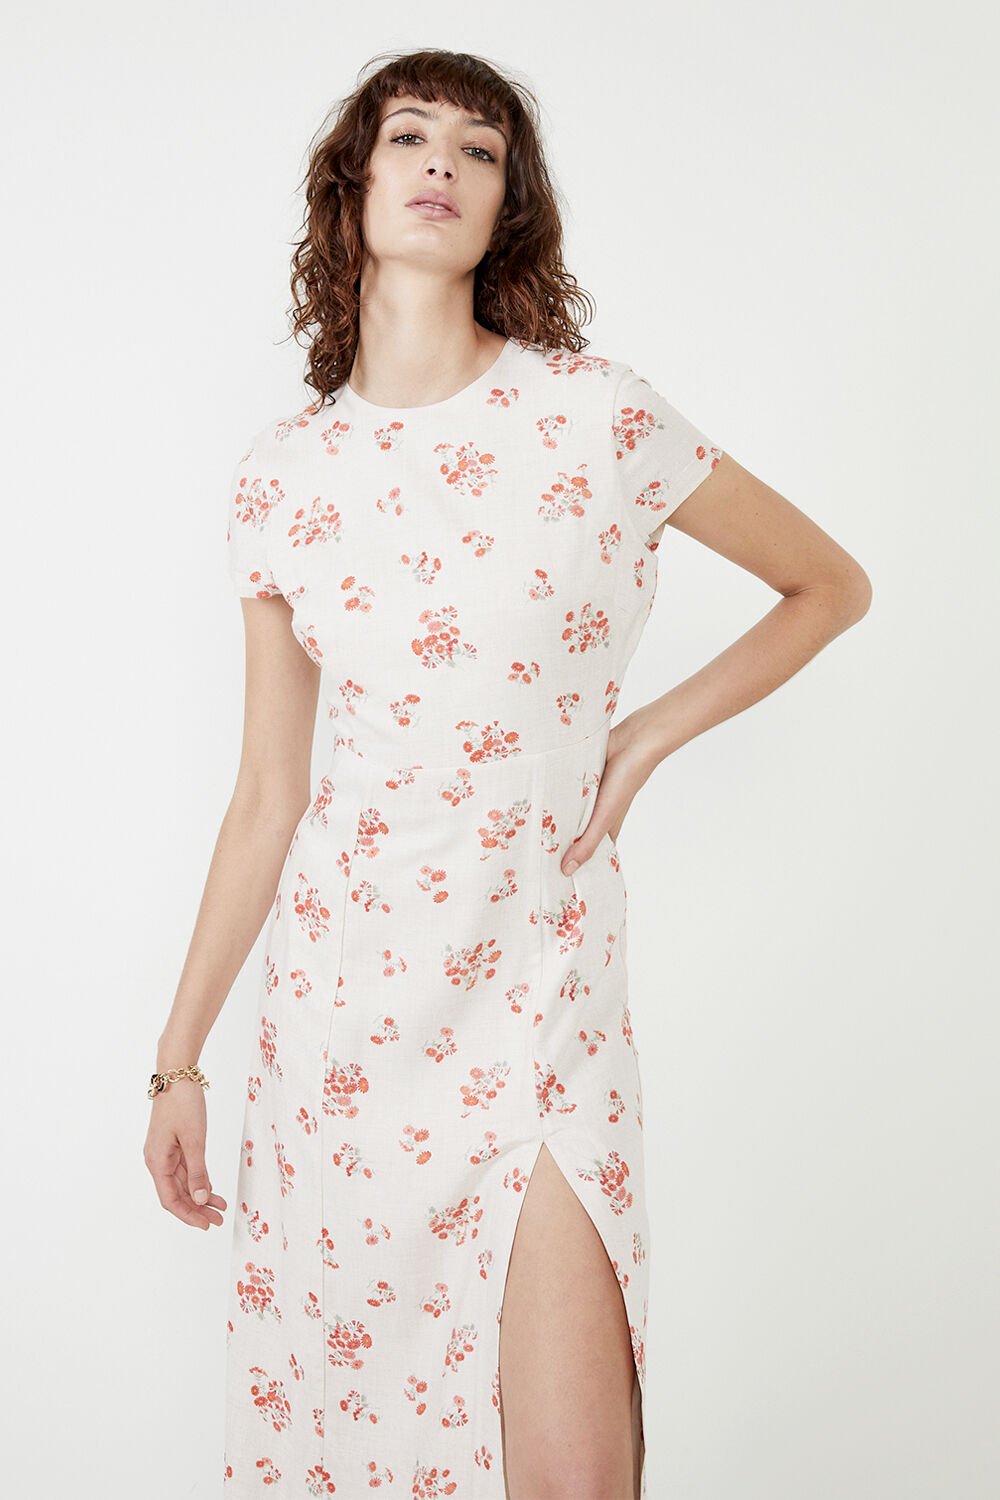 THE FLORAL MIDI DRESS in colour PEARLED IVORY